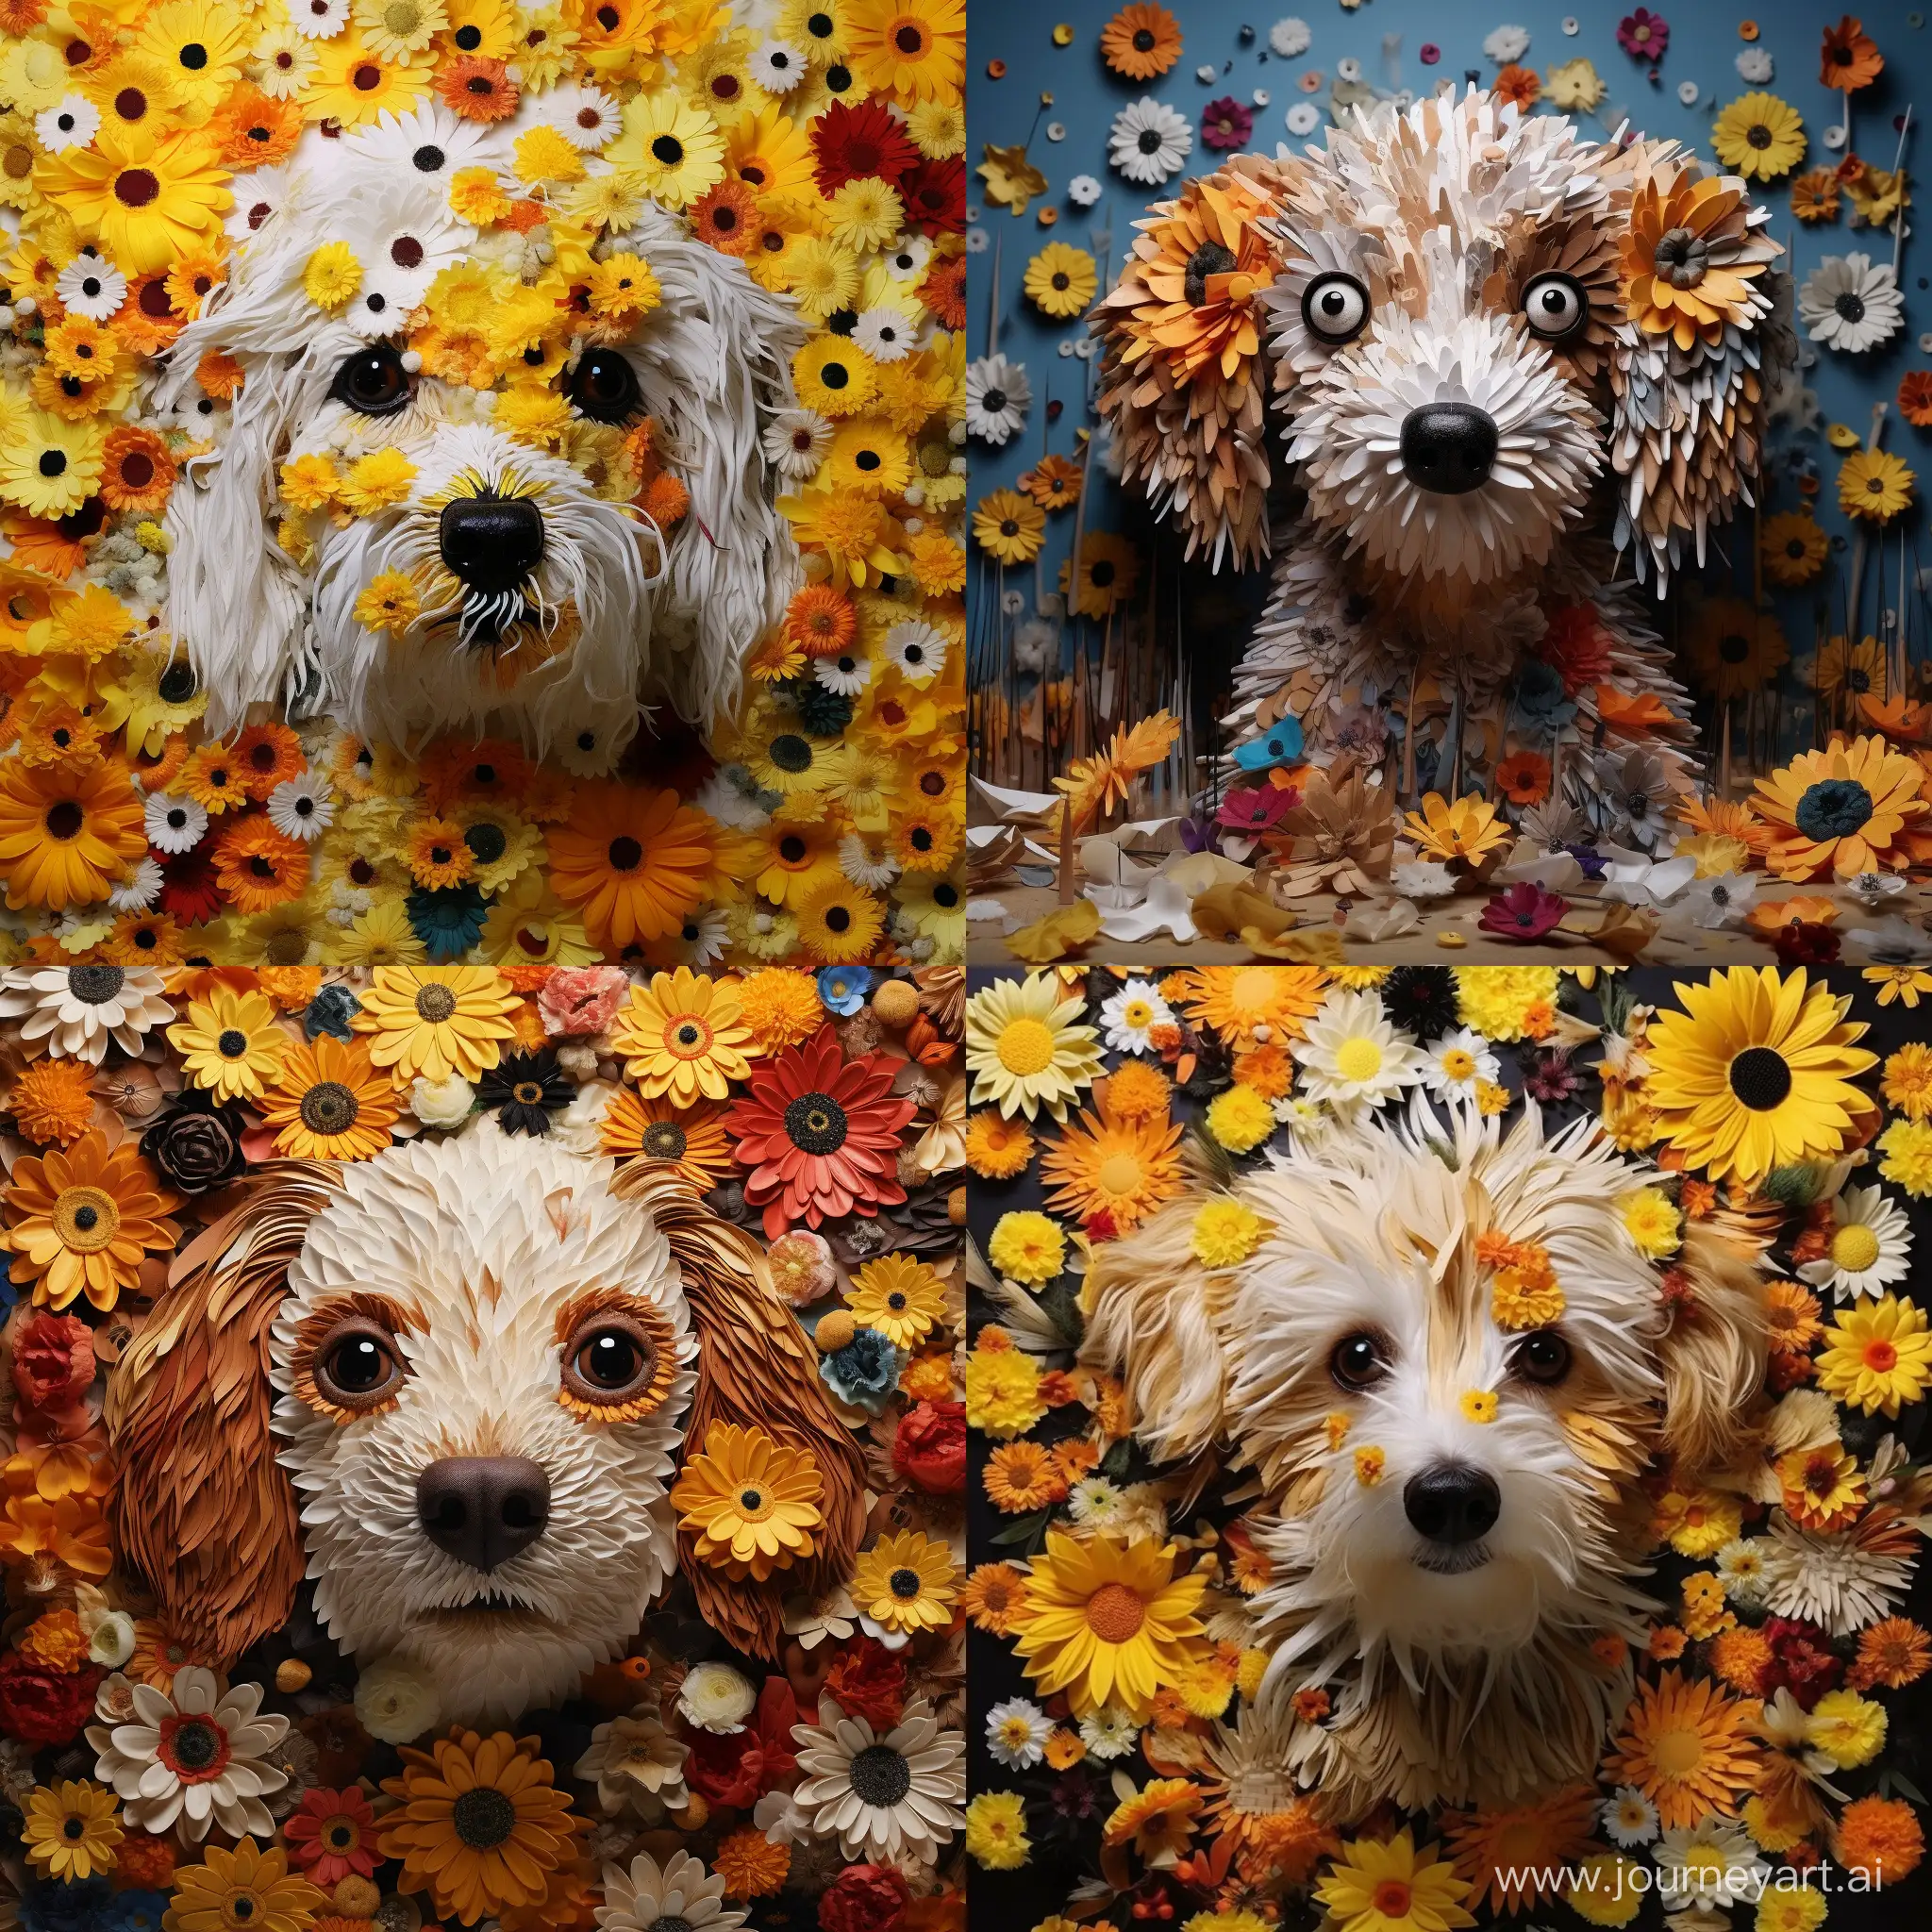 most adorable dog made exclusively of flowers & wispy dandelions has the saddest eyes & facial expression, the eyes are detailed & tearful in a human-like way, stunning, hypnotic, illusion, visionary art + still life + figurative art, mesmerizing motifs, collection of different flowers, blossoms, flora masterful technique & imaginative art with immersive background, perfect composition, masterpiece insanely-detailed hyper-detailed beautiful, impressive artistry, technique, depth, intricate fine details, artistic elements, purposeful aesthetic intricacies to enhance 3D effects, insanely detailed & varied textures, gorgeous multidimensional, design overlays throughout, imperial colors subject's eyes are opened glassy with tears, oil gouache melting, acrylic, high contrast, colourful polychromatic, ultra quality, Anna Dittmann & Audrey Flack & Oleg Shupliak & cyril rolando & Vladimir Kush & patrick nagel & Pino Daeni Bridget Riley, & victor Vasarely & Wayne Thiebaud & Karl Reichert,